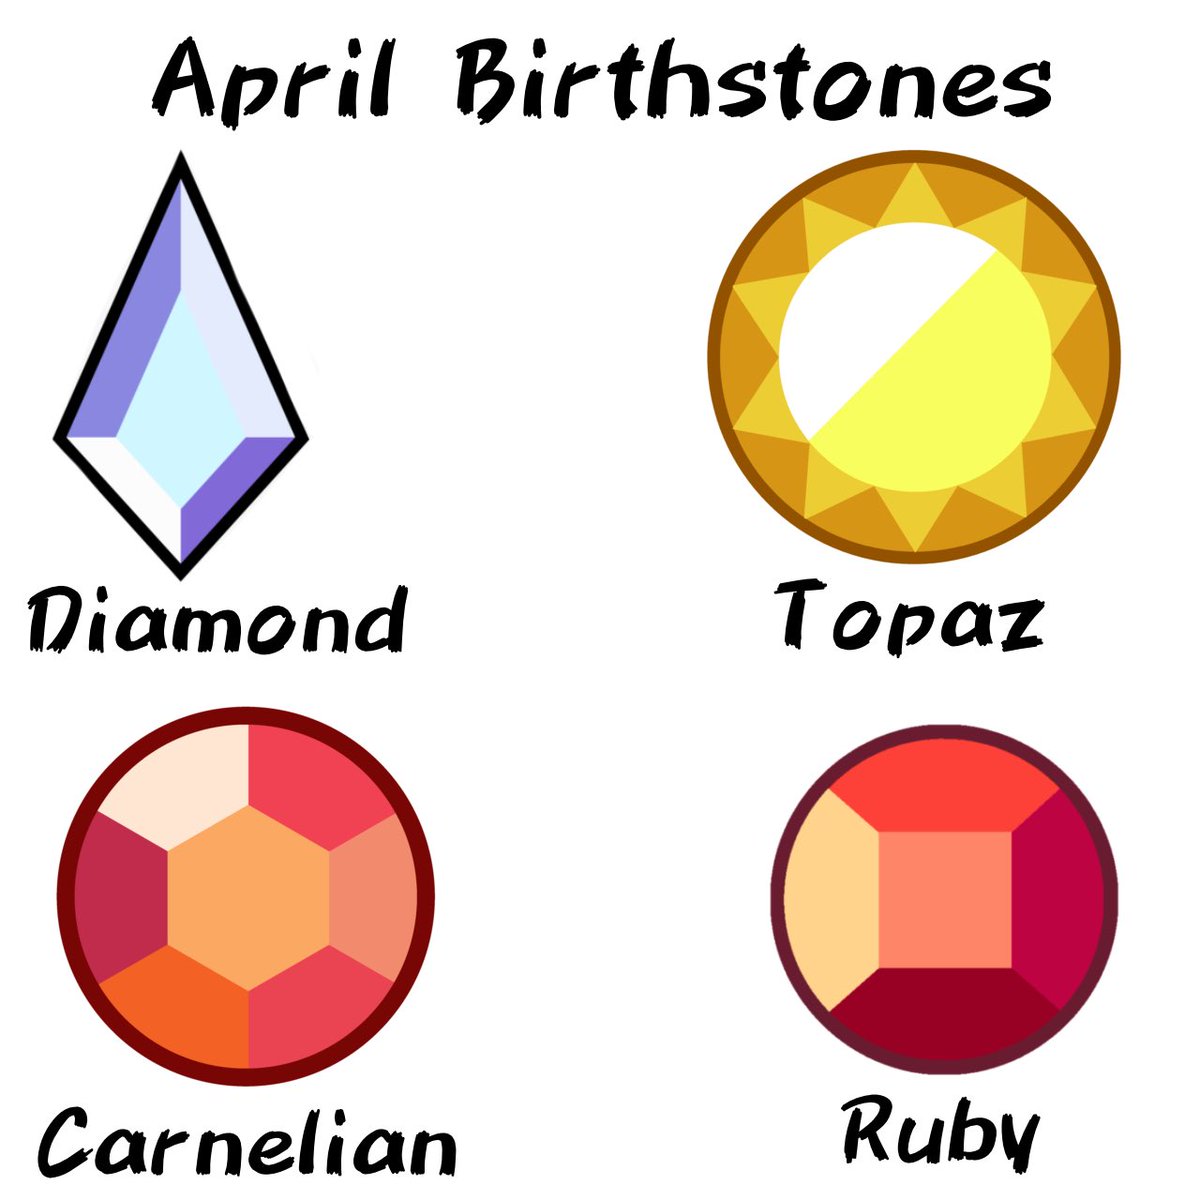 The Birthstones of April.